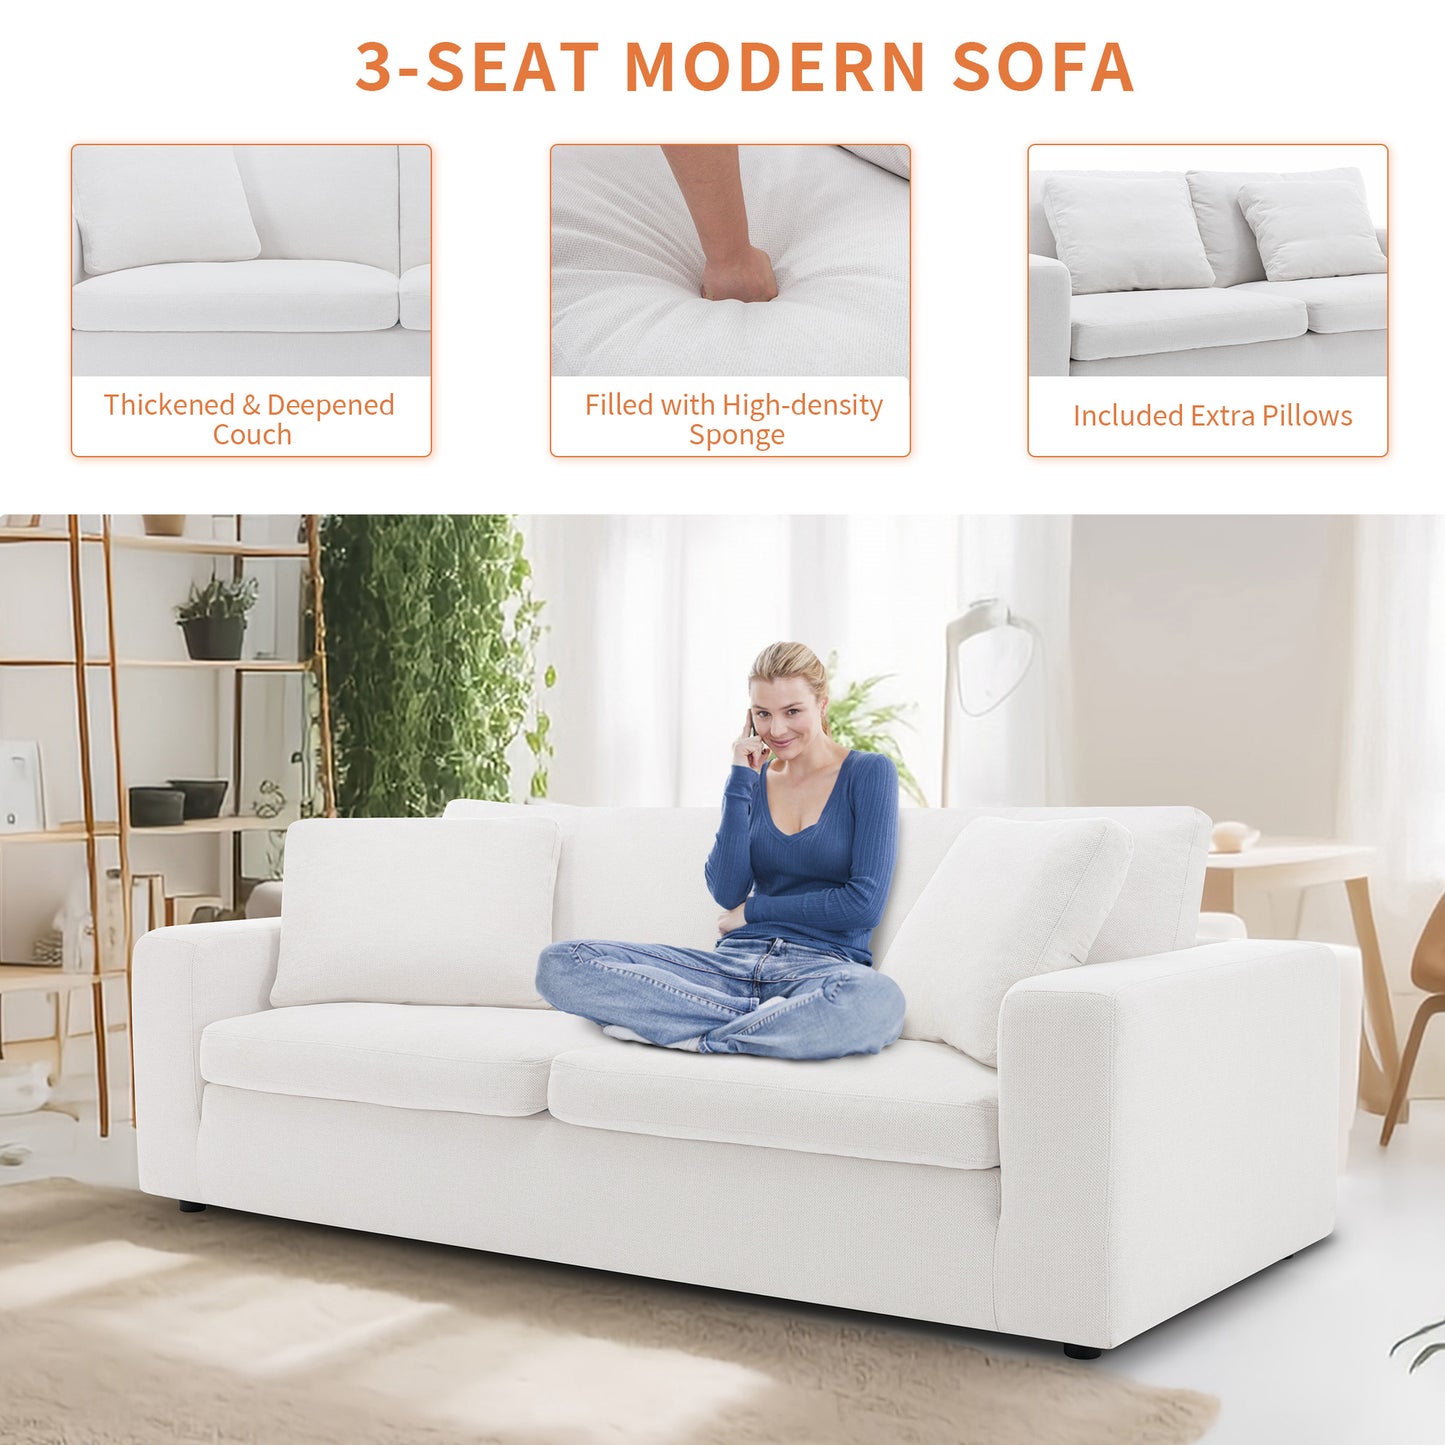 COLAMY 90" Fabric Modern Sofa with Removable Back and Seat Cushions